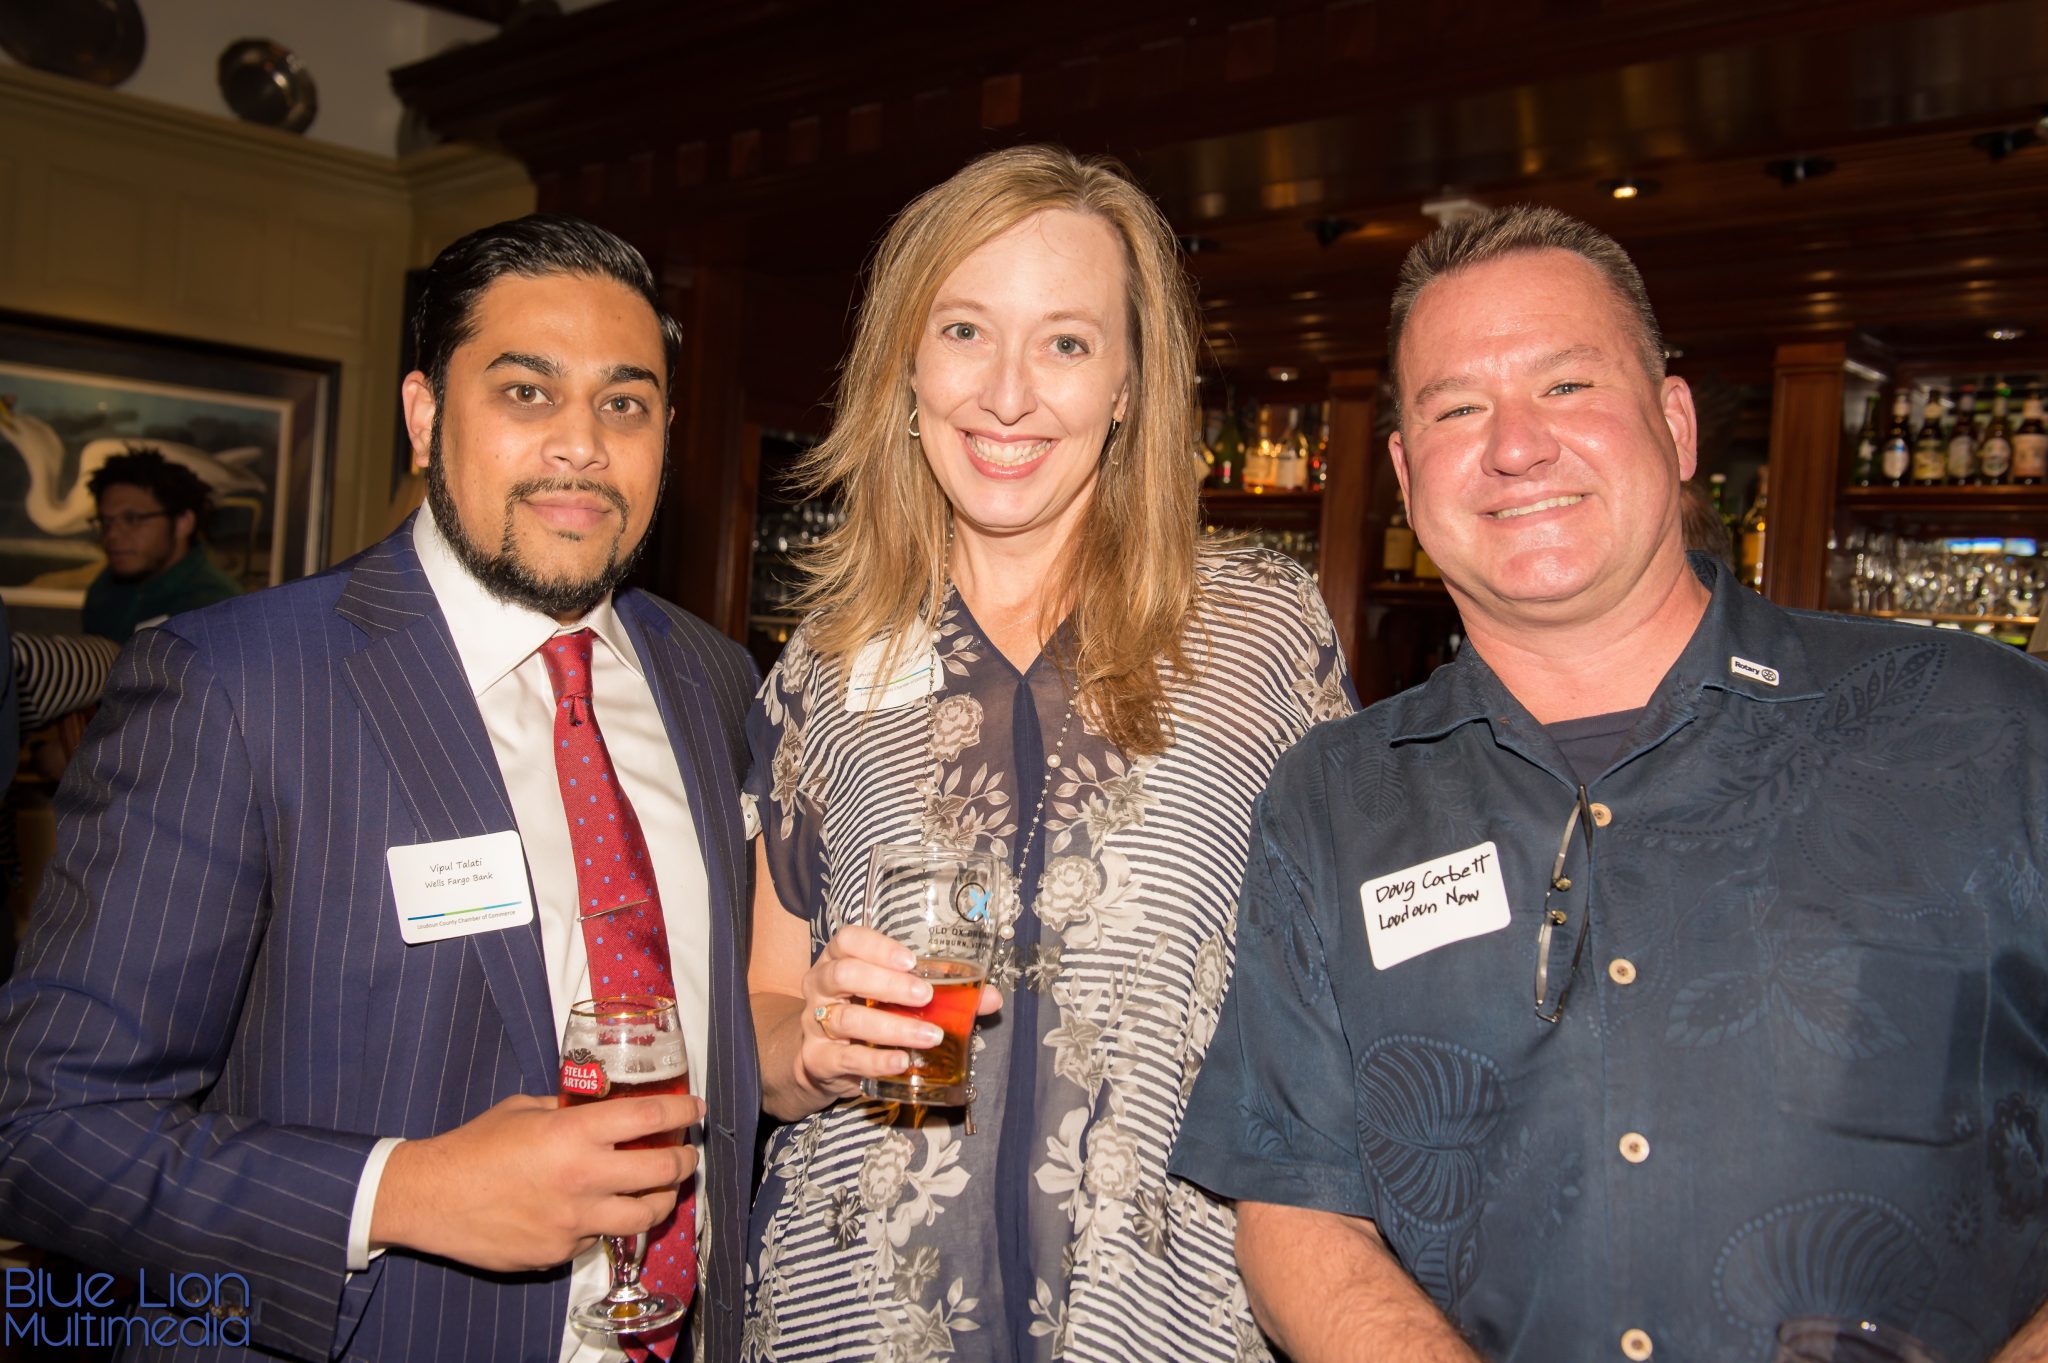 Networking at Clydes